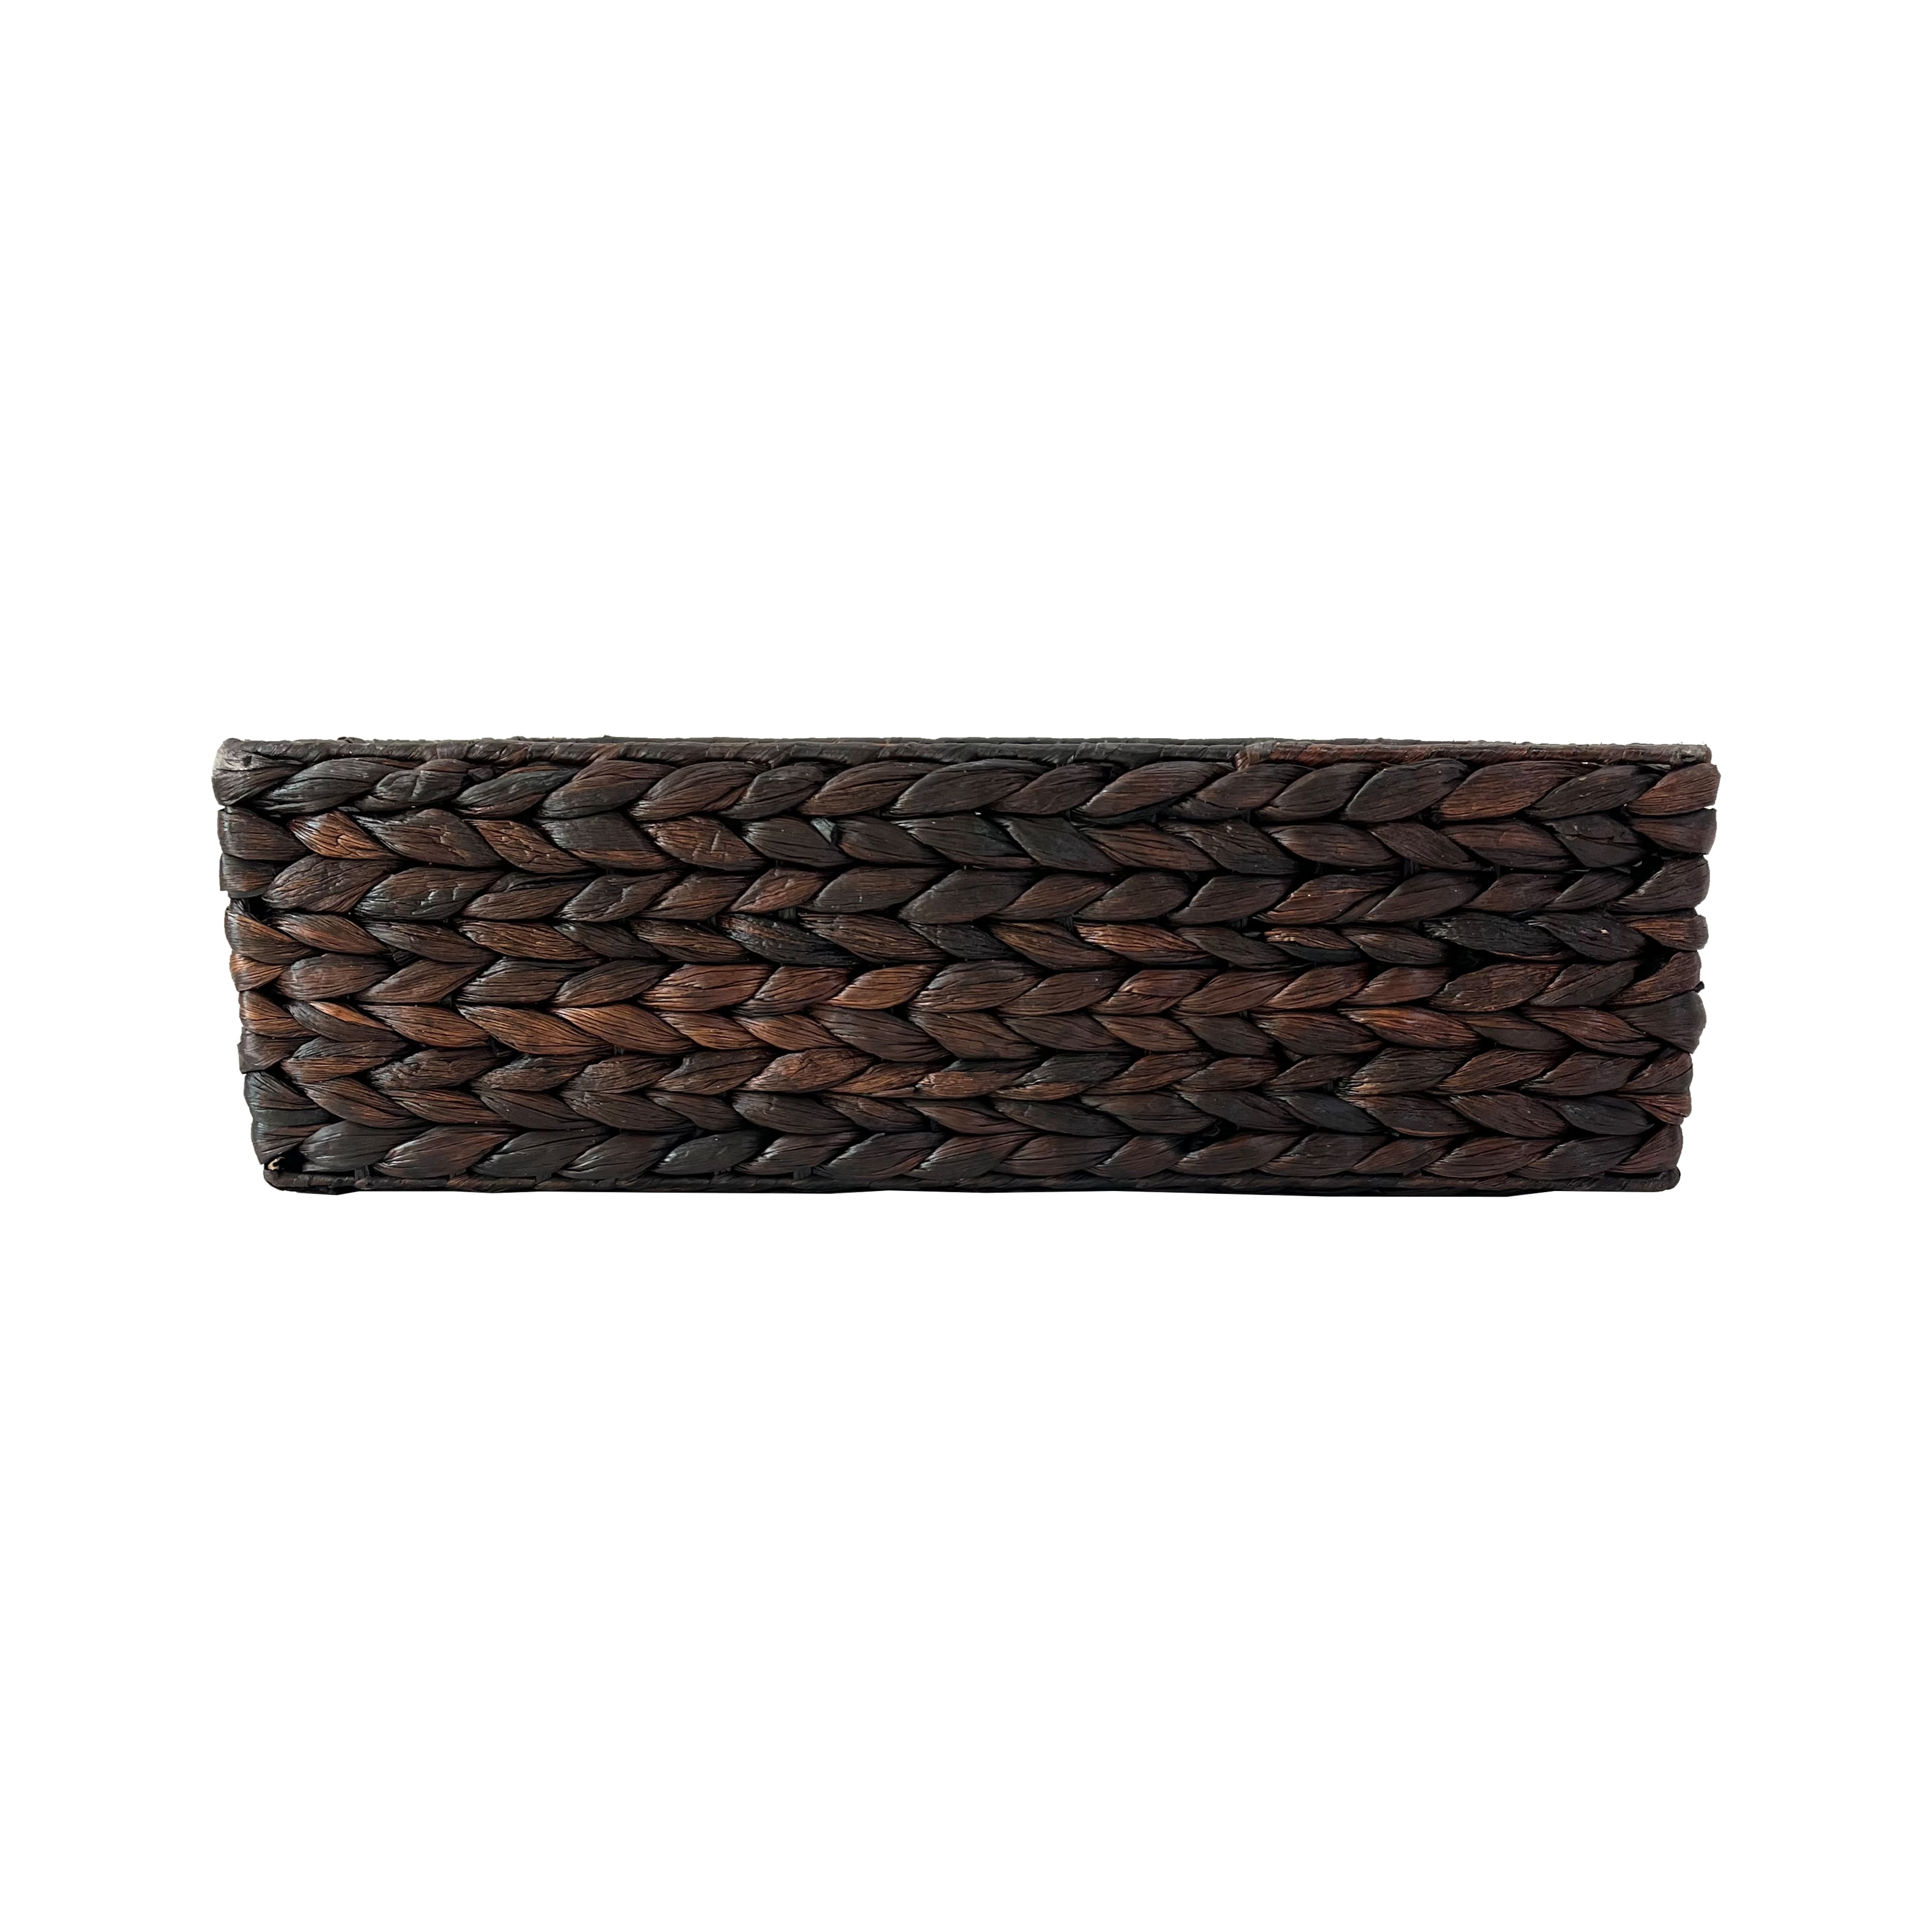 Juvale 5-pcs Brown Small Rectangular Woven Nesting Baskets, Lined Wicker  Set For Organizing Closet, Kitchen, Pantry Shelves, Bathroom (3 Sizes) :  Target